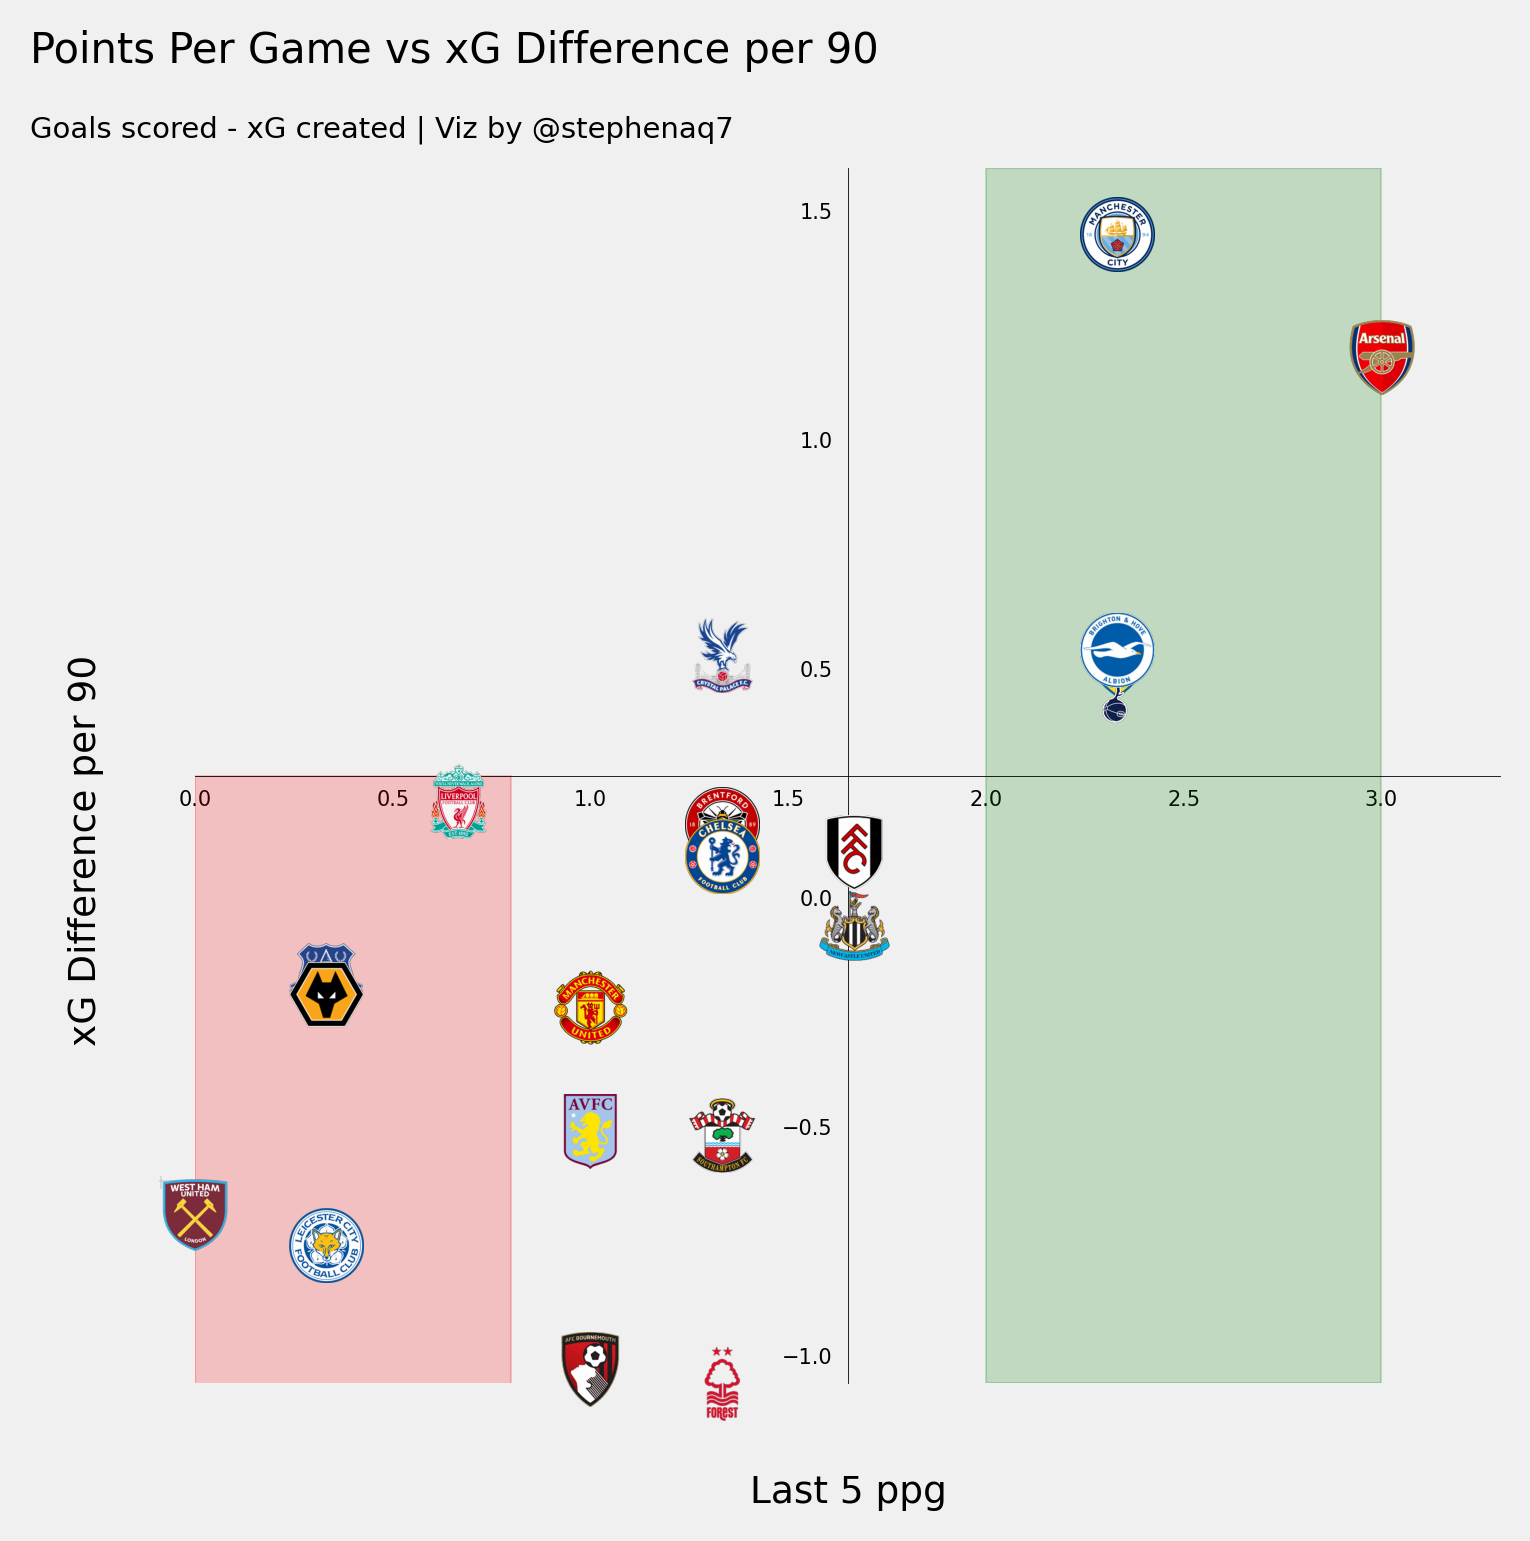 Points Per Game vs xG Difference per 90